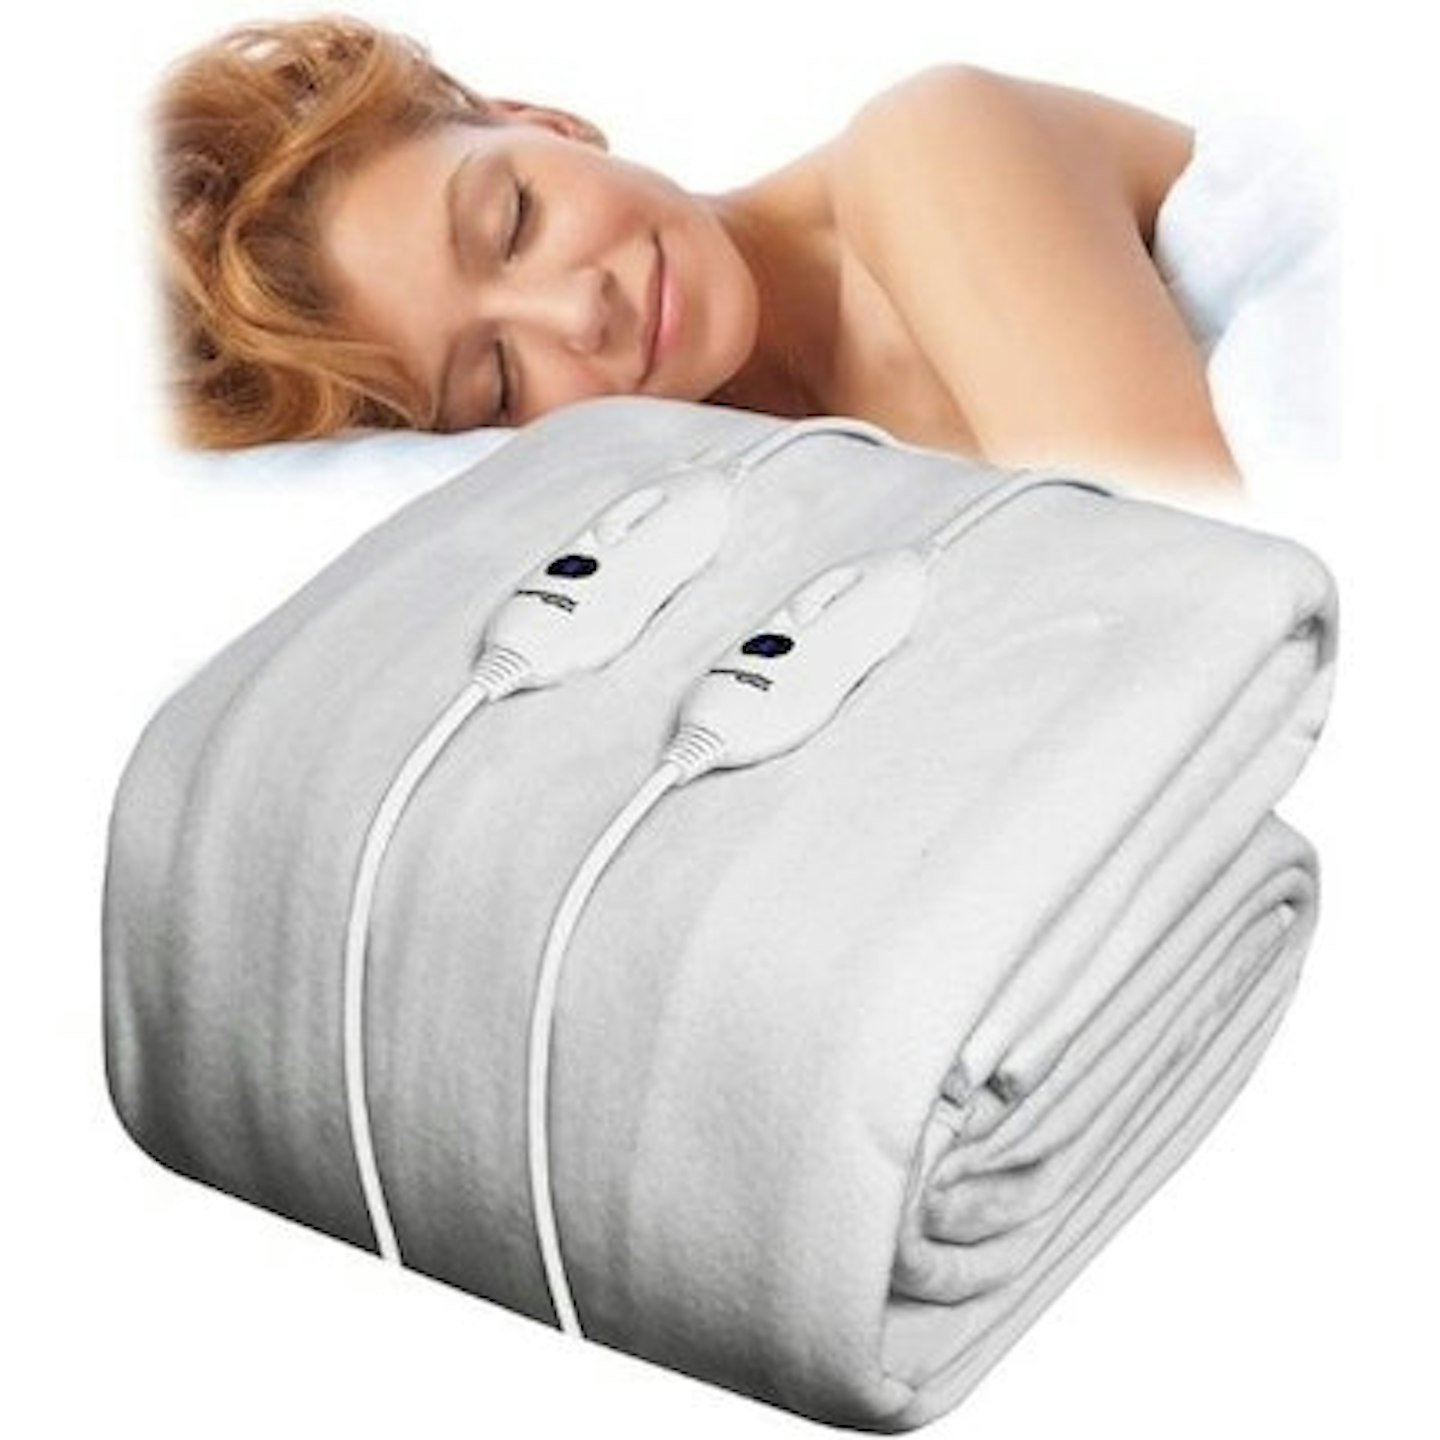 Dreamcatcher Double Fitted Electric Blanket , Machine Washable Heated Blanket, Soft Underblanket with 3 Comfort settings, 2 x Controllers